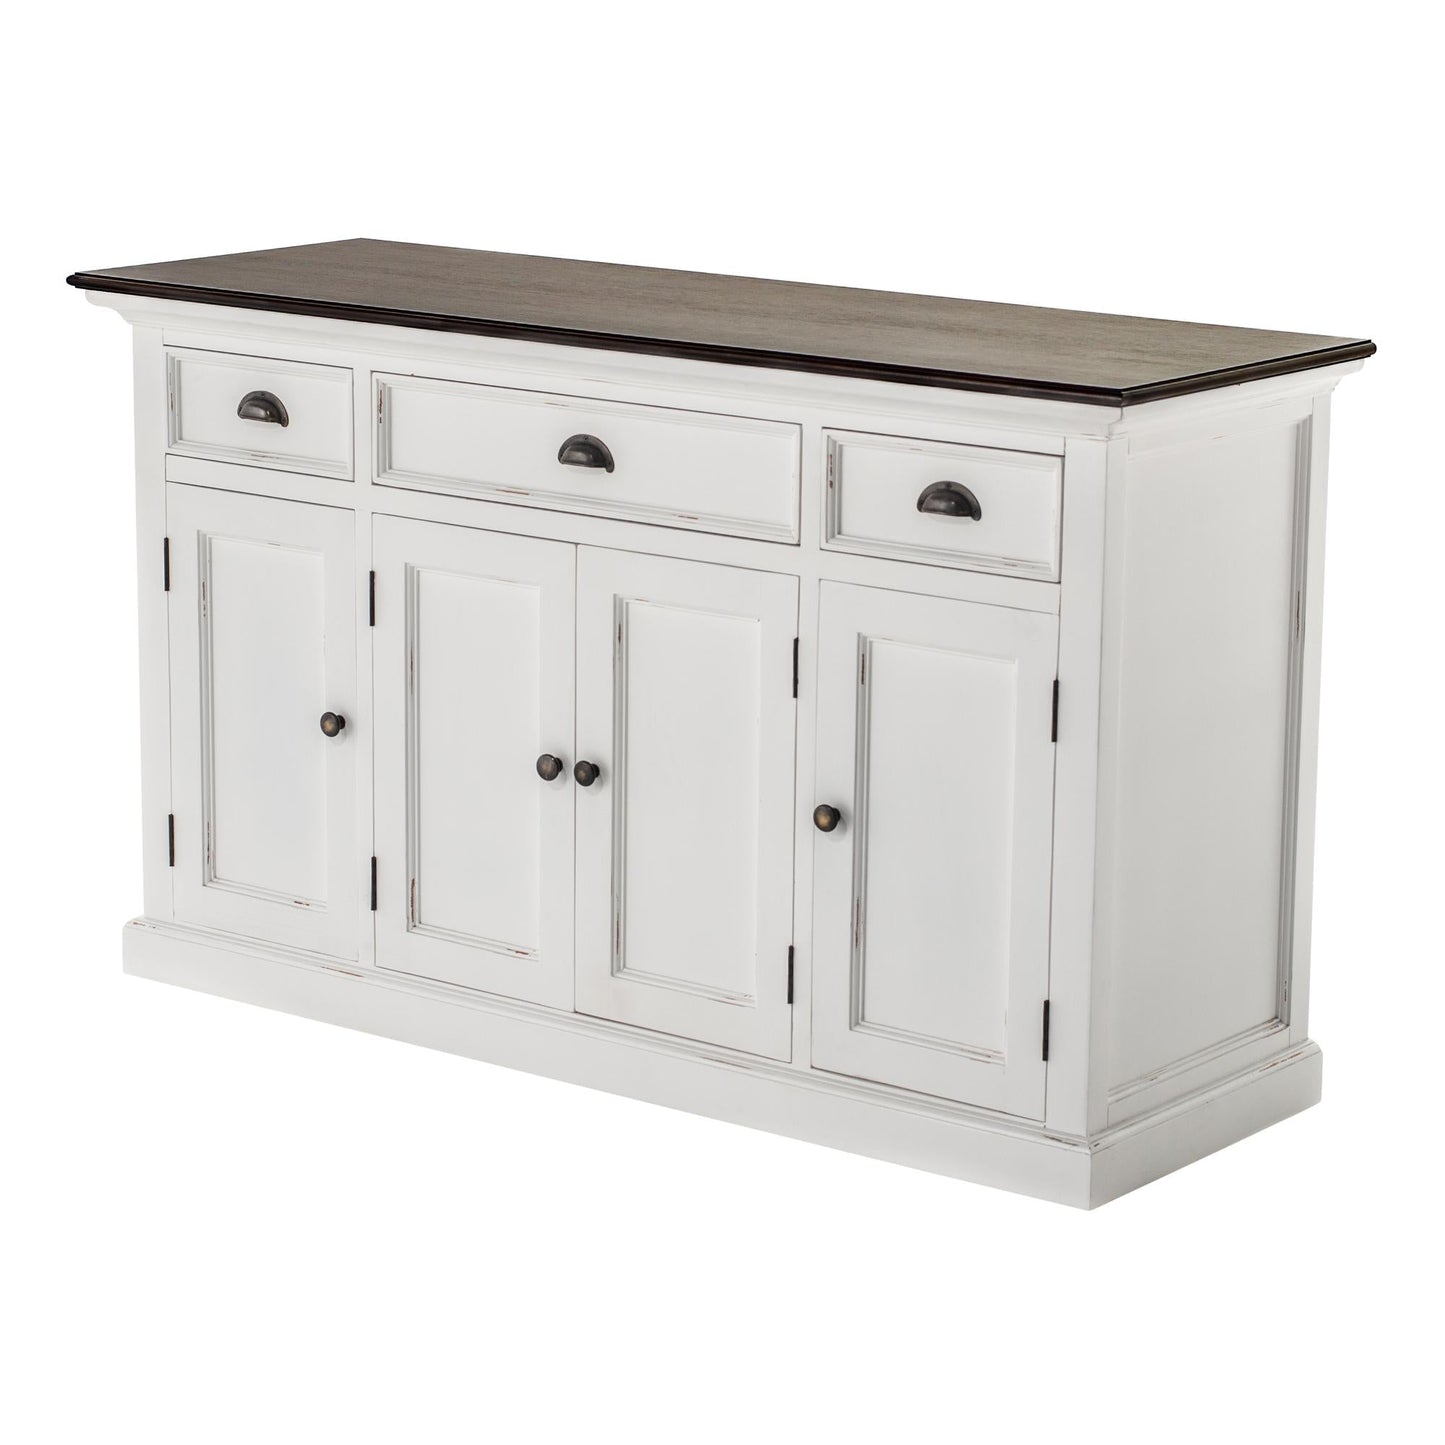 NovaSolo Halifax Accent 57" Classic White & Brown Mahogany Buffet With 4 Doors & 3 Drawers